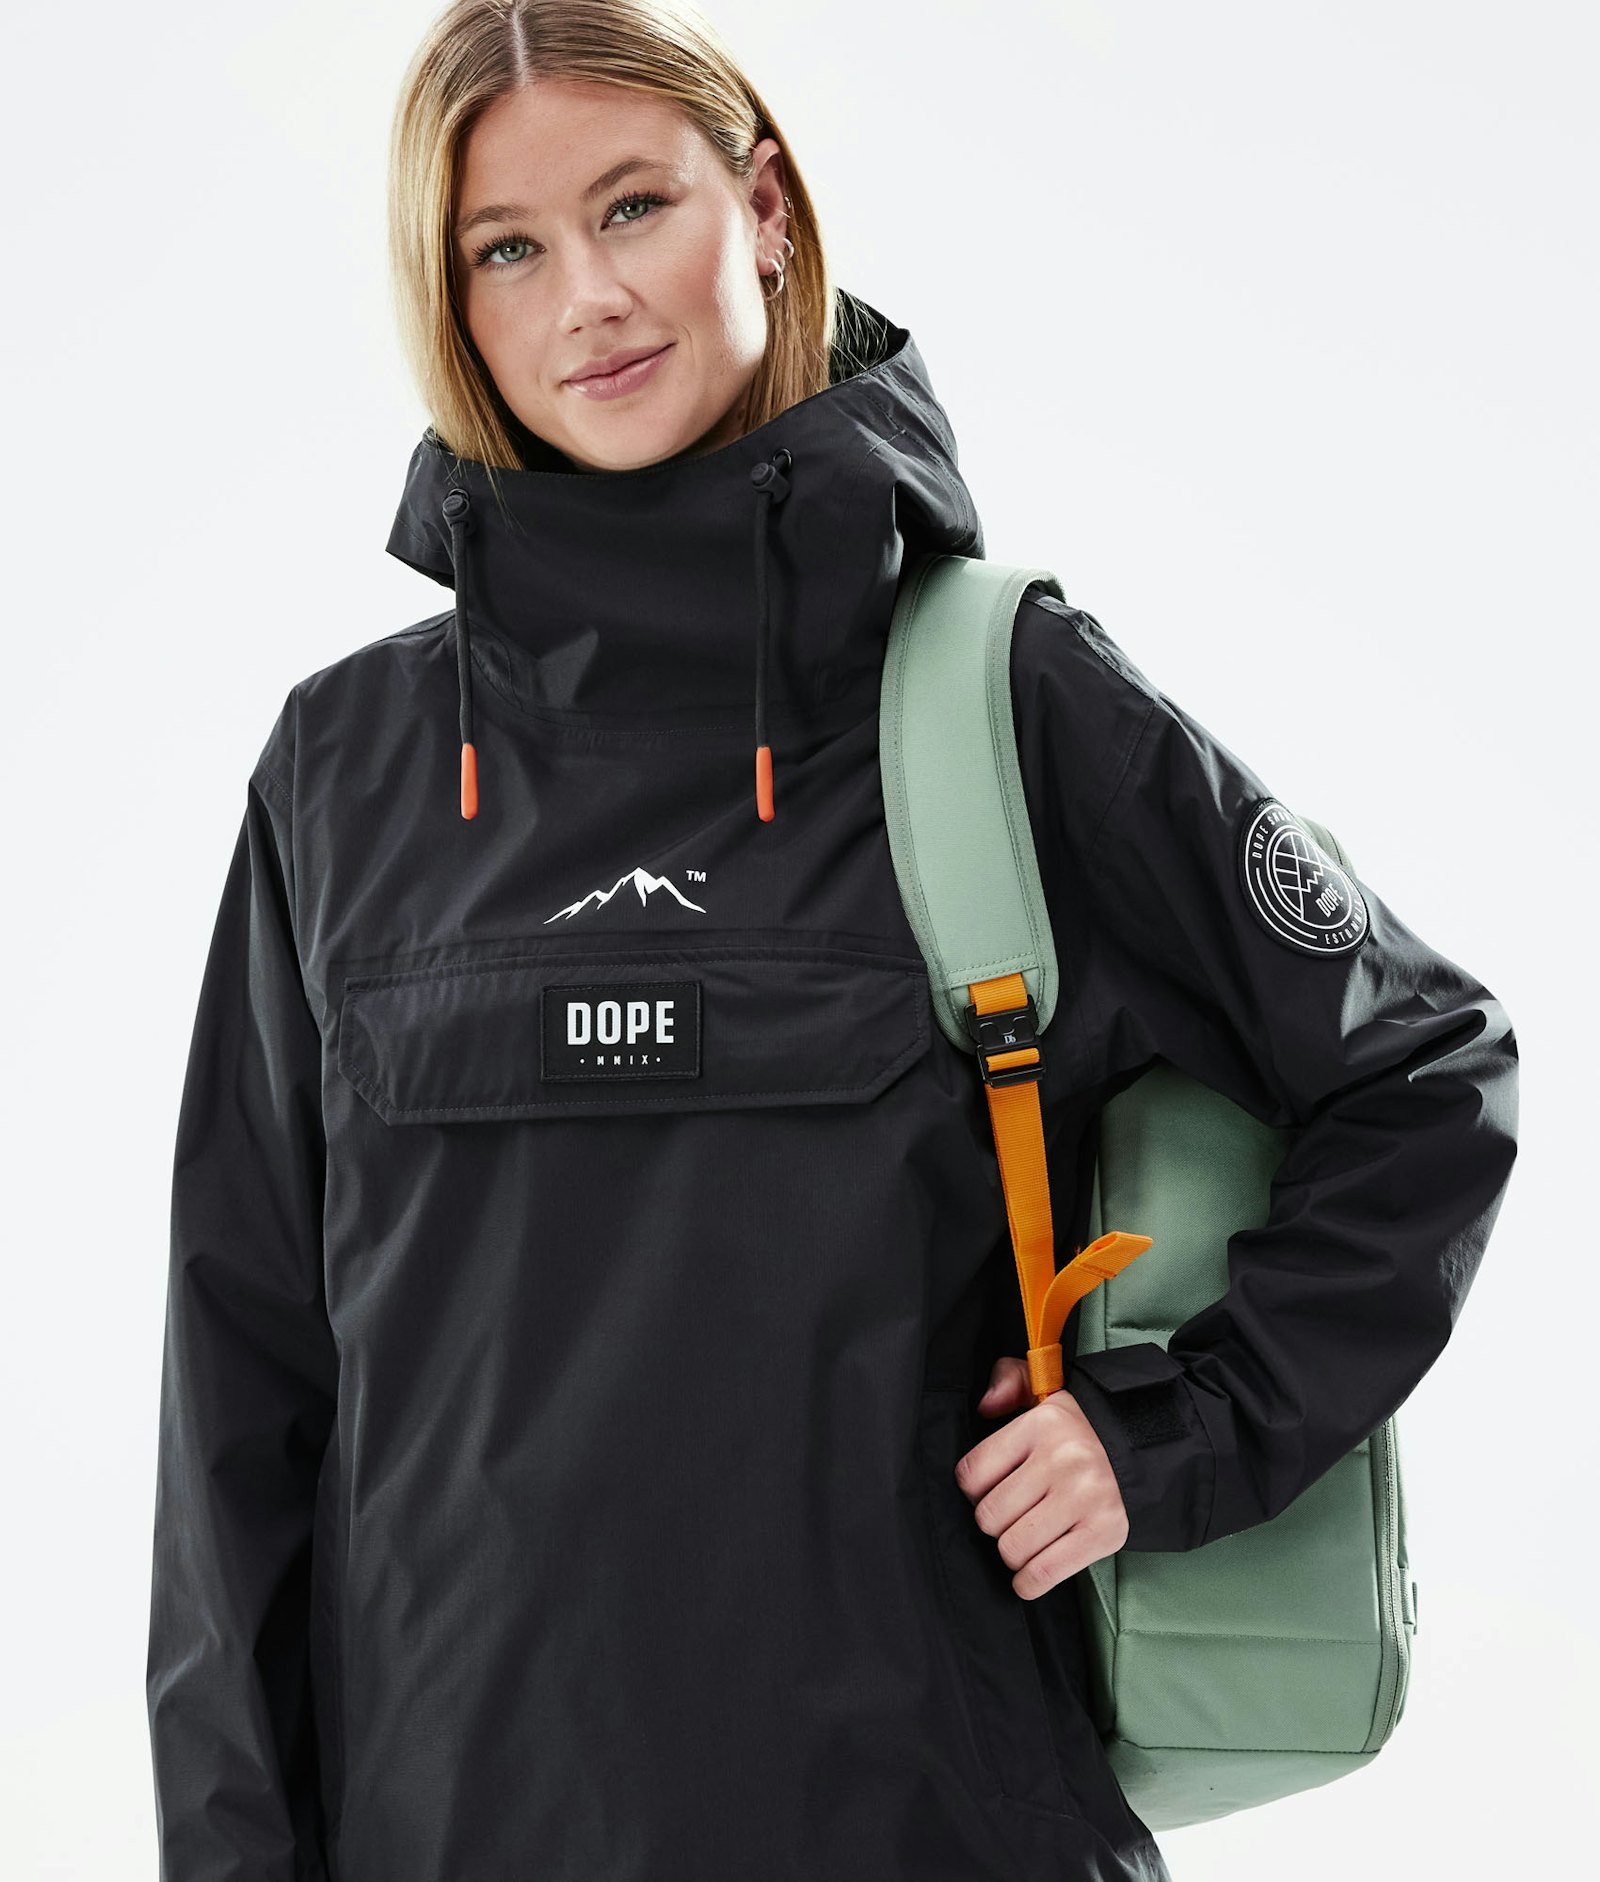 Women's Outdoor Vests - Hooded, Lightweight, & Other Outerwear